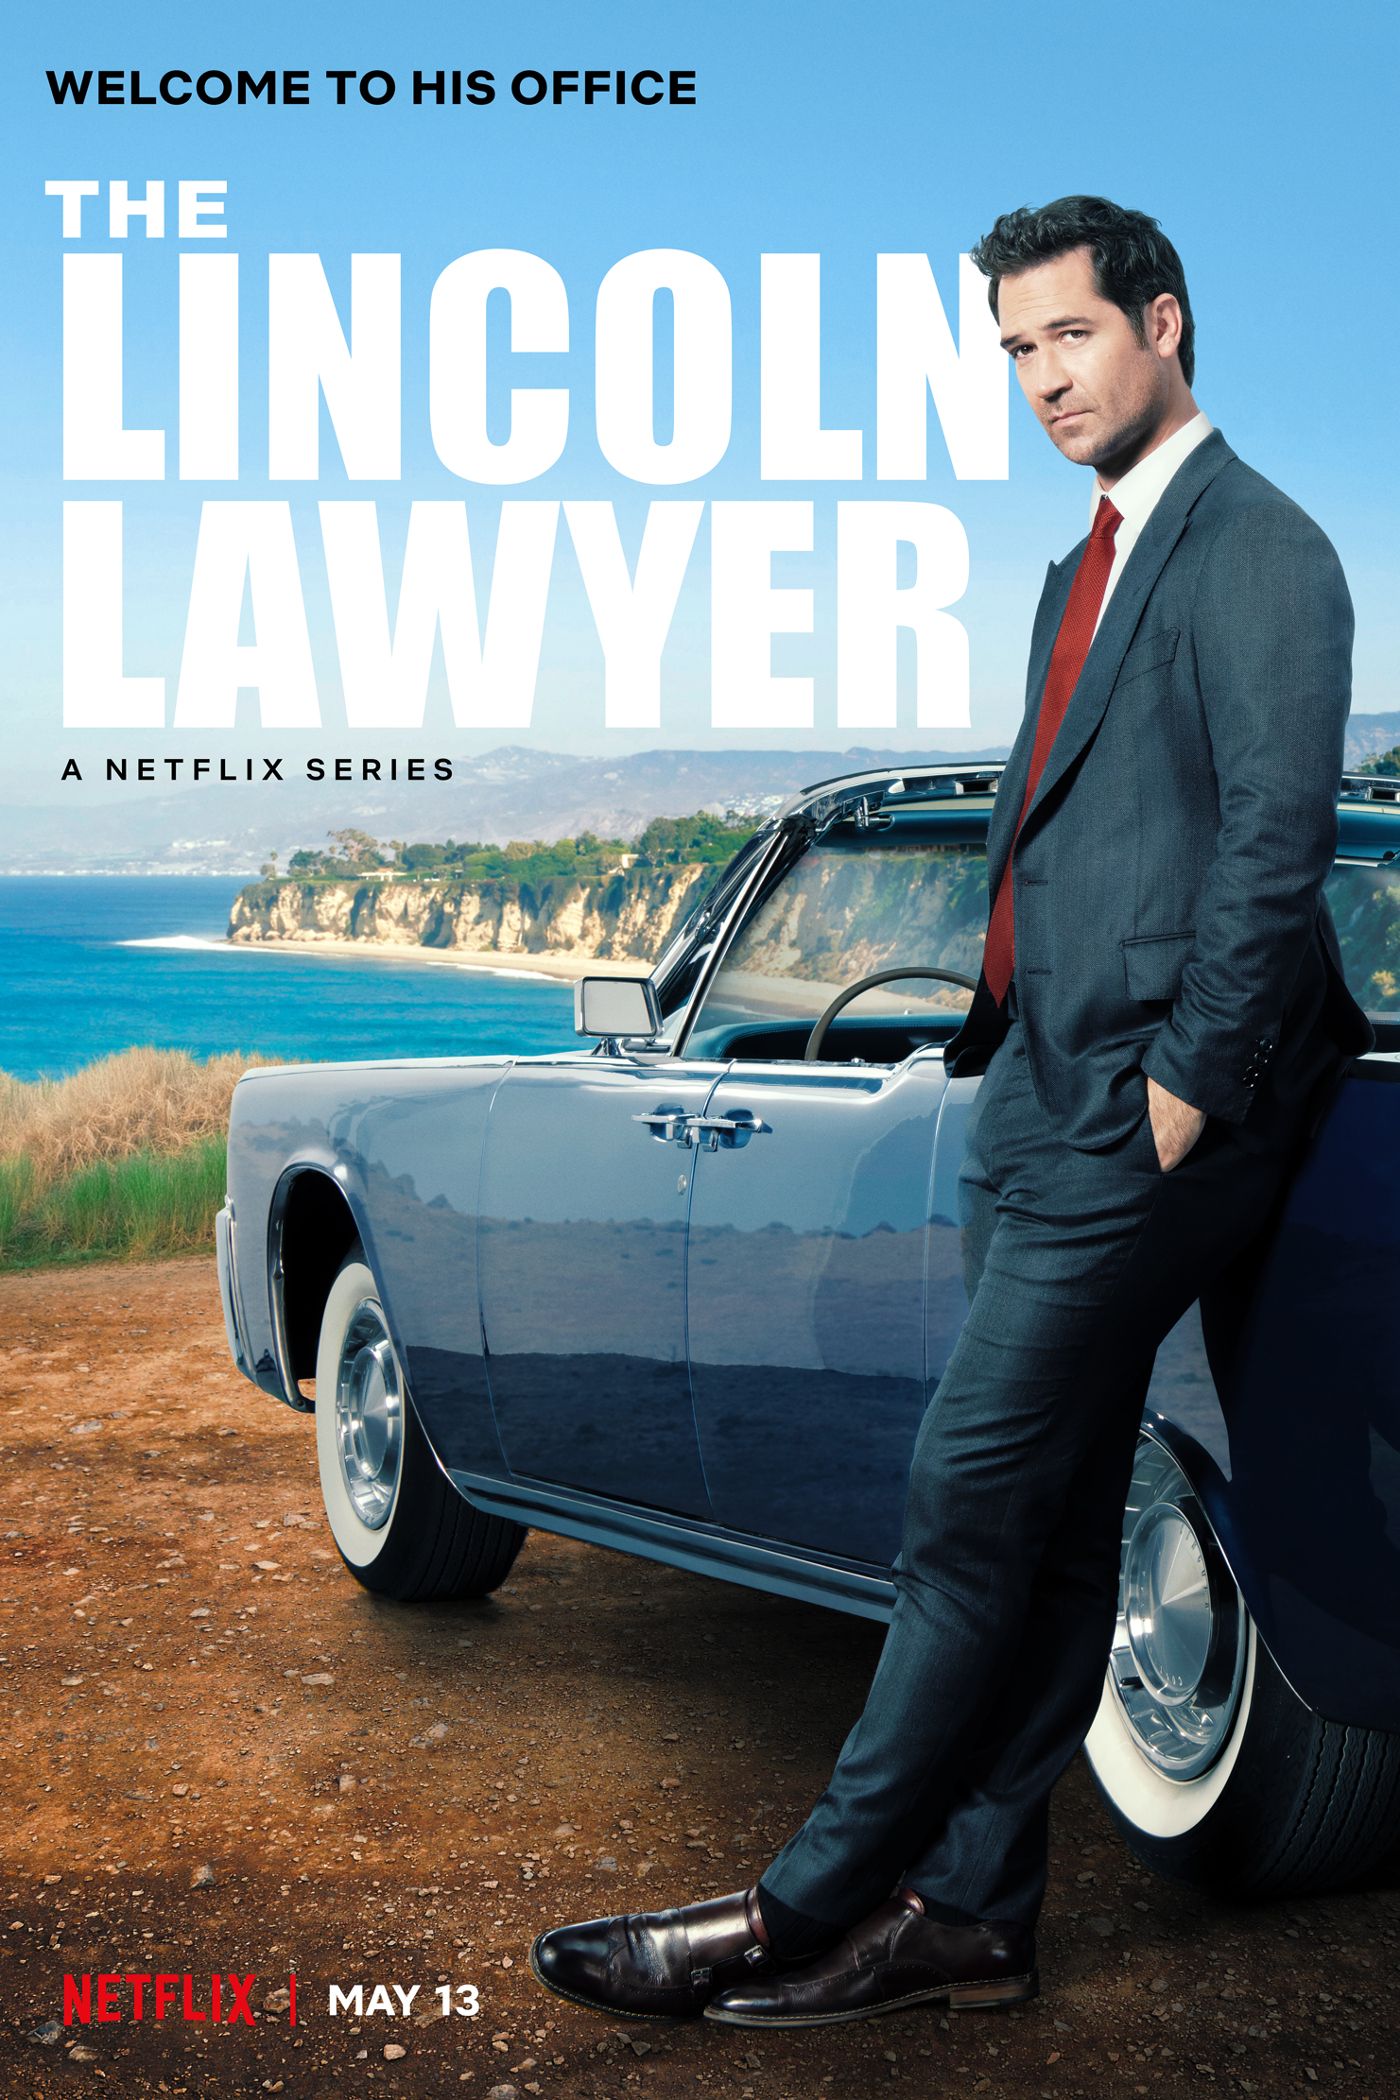 Is there a season 4 of Lincoln Lawyer?